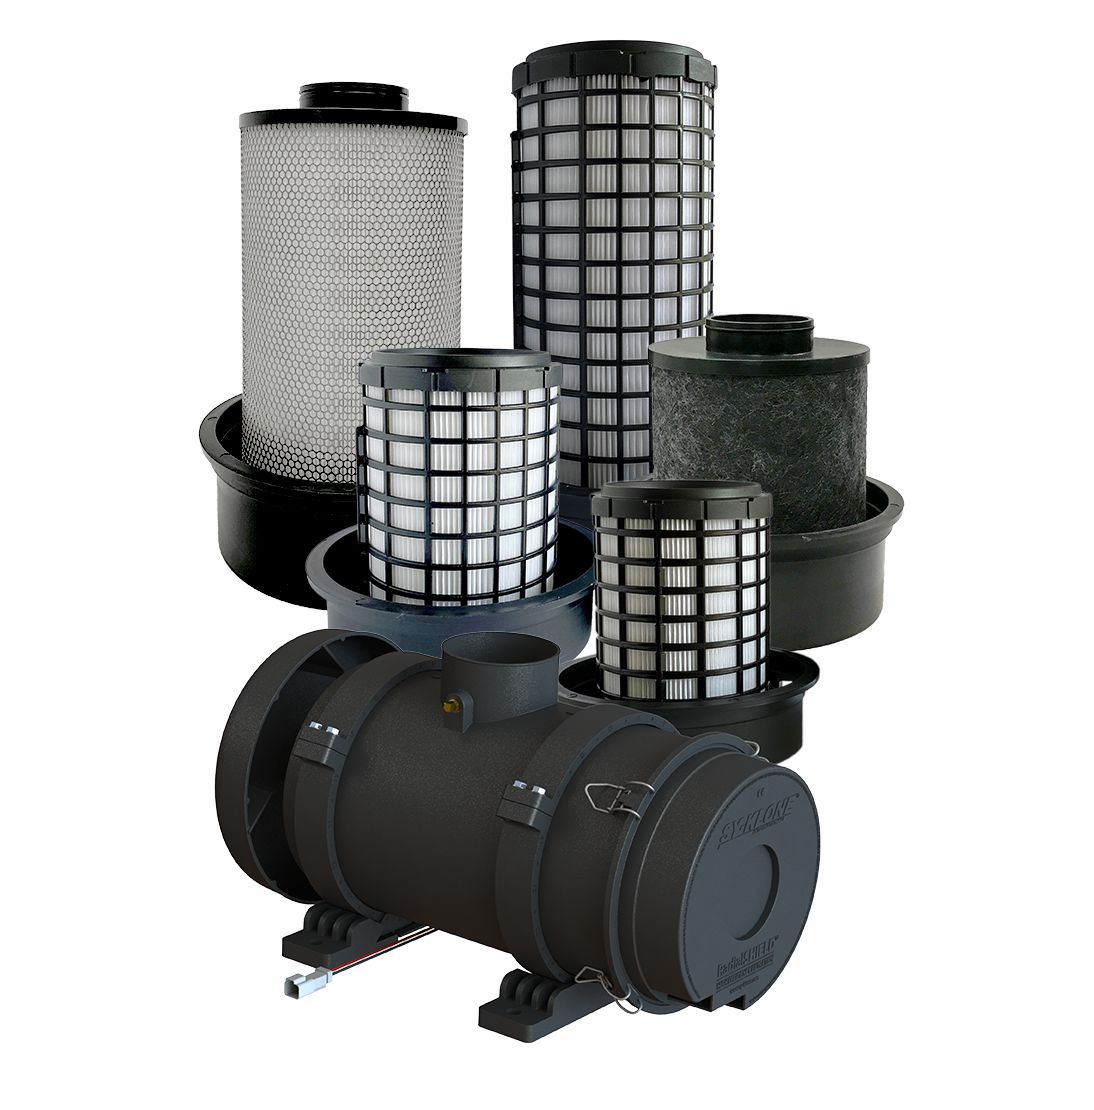 Sy-Klone expands filtration products with RadialSHIELD and Vortex filters